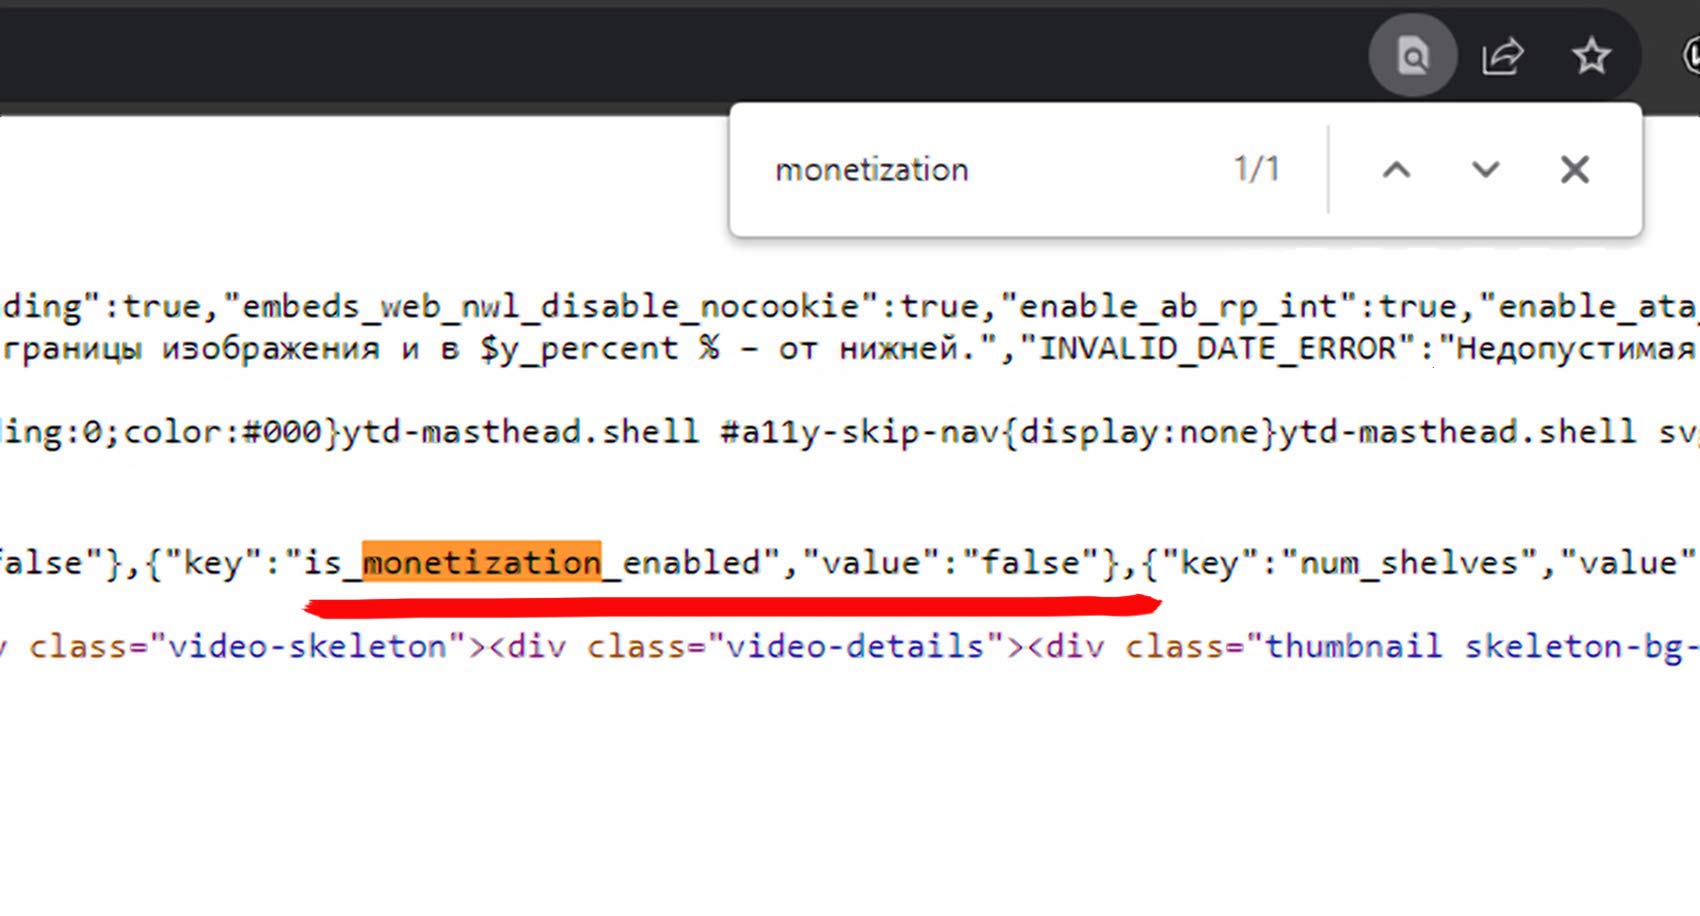 Checking YouTube monetization by viewing the HTML code of the channel page.